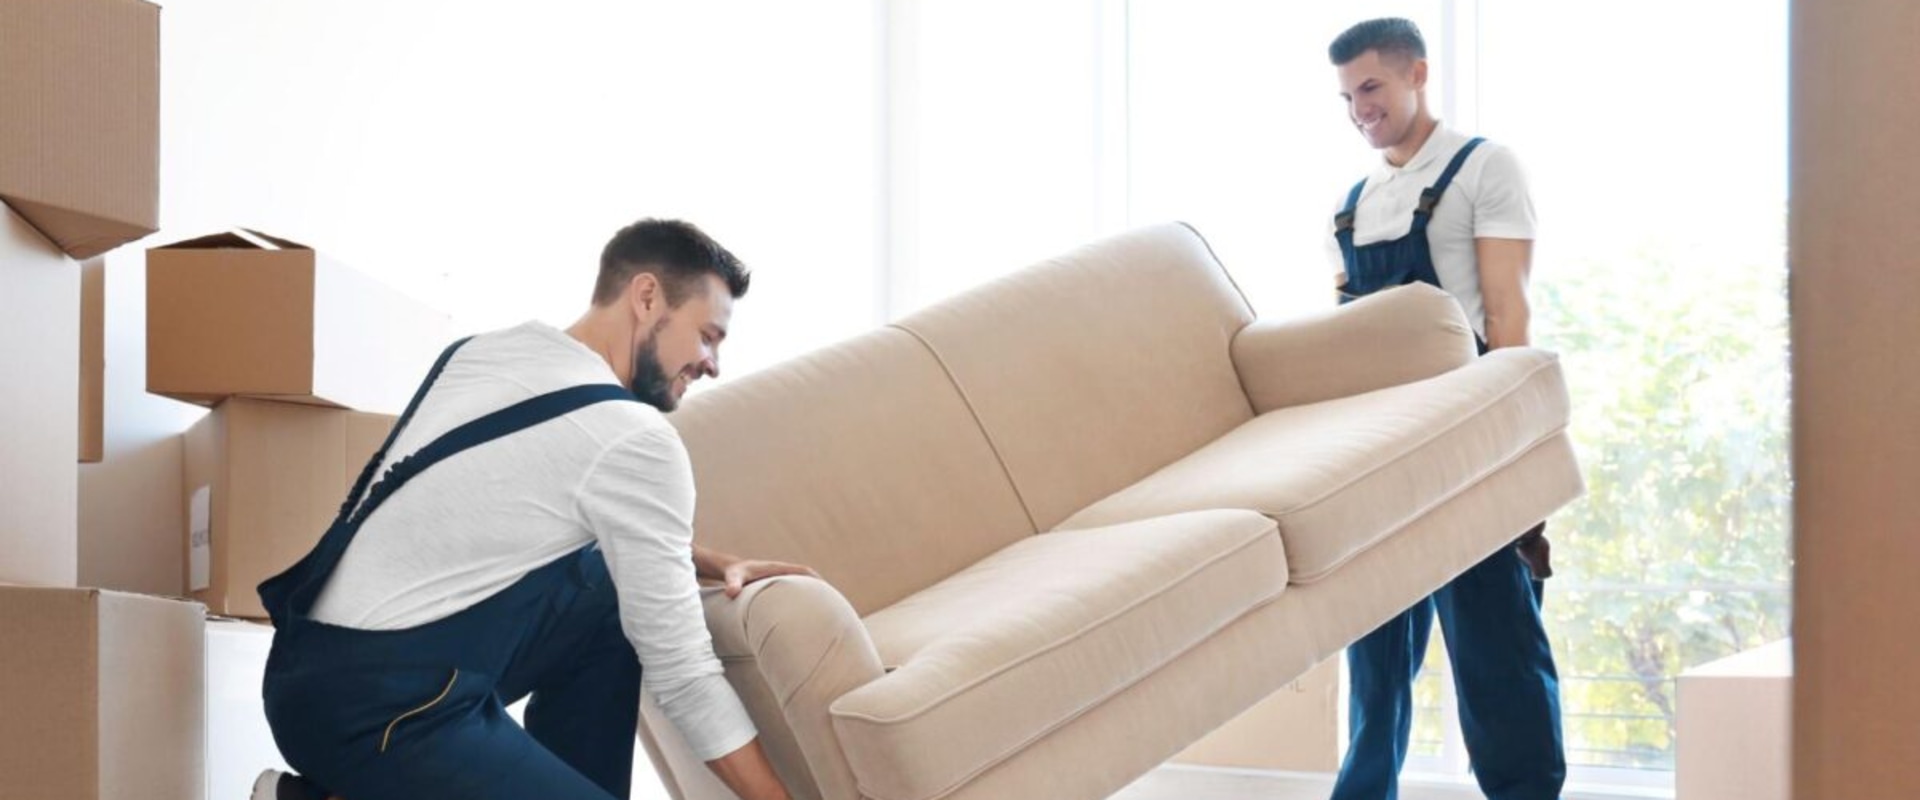 How to Spot Fake Reviews: A Guide for Finding Reliable Houston Movers